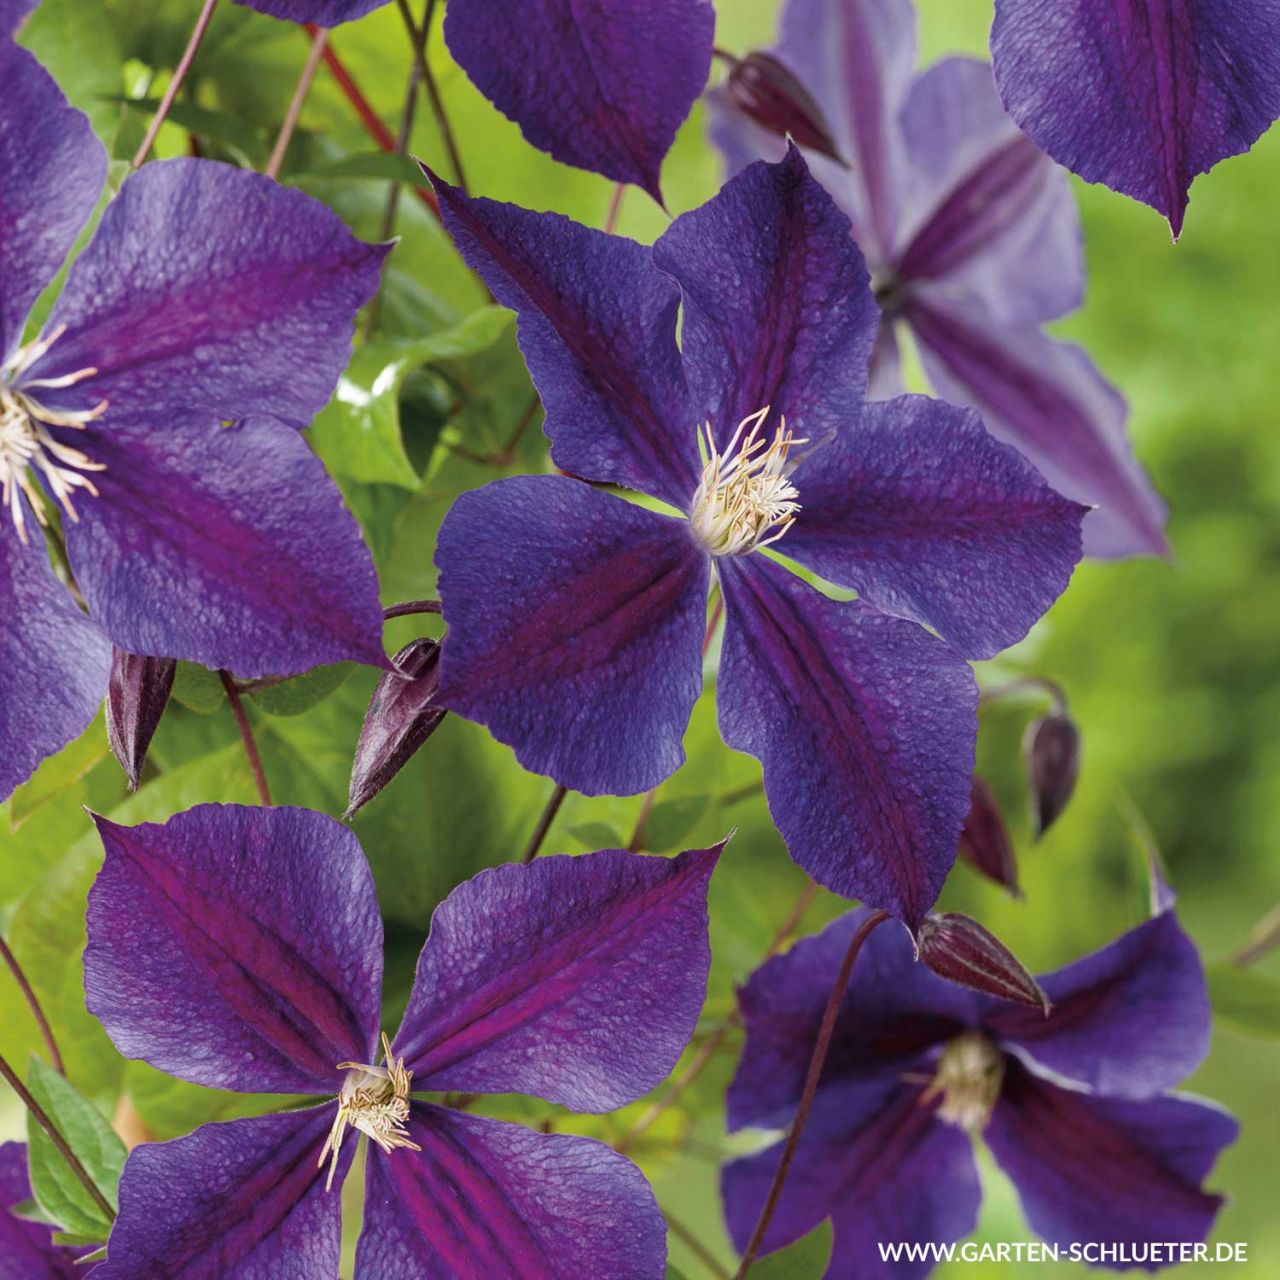  Clematis 'Star of India' - Clematis Hybride 'Star of India'